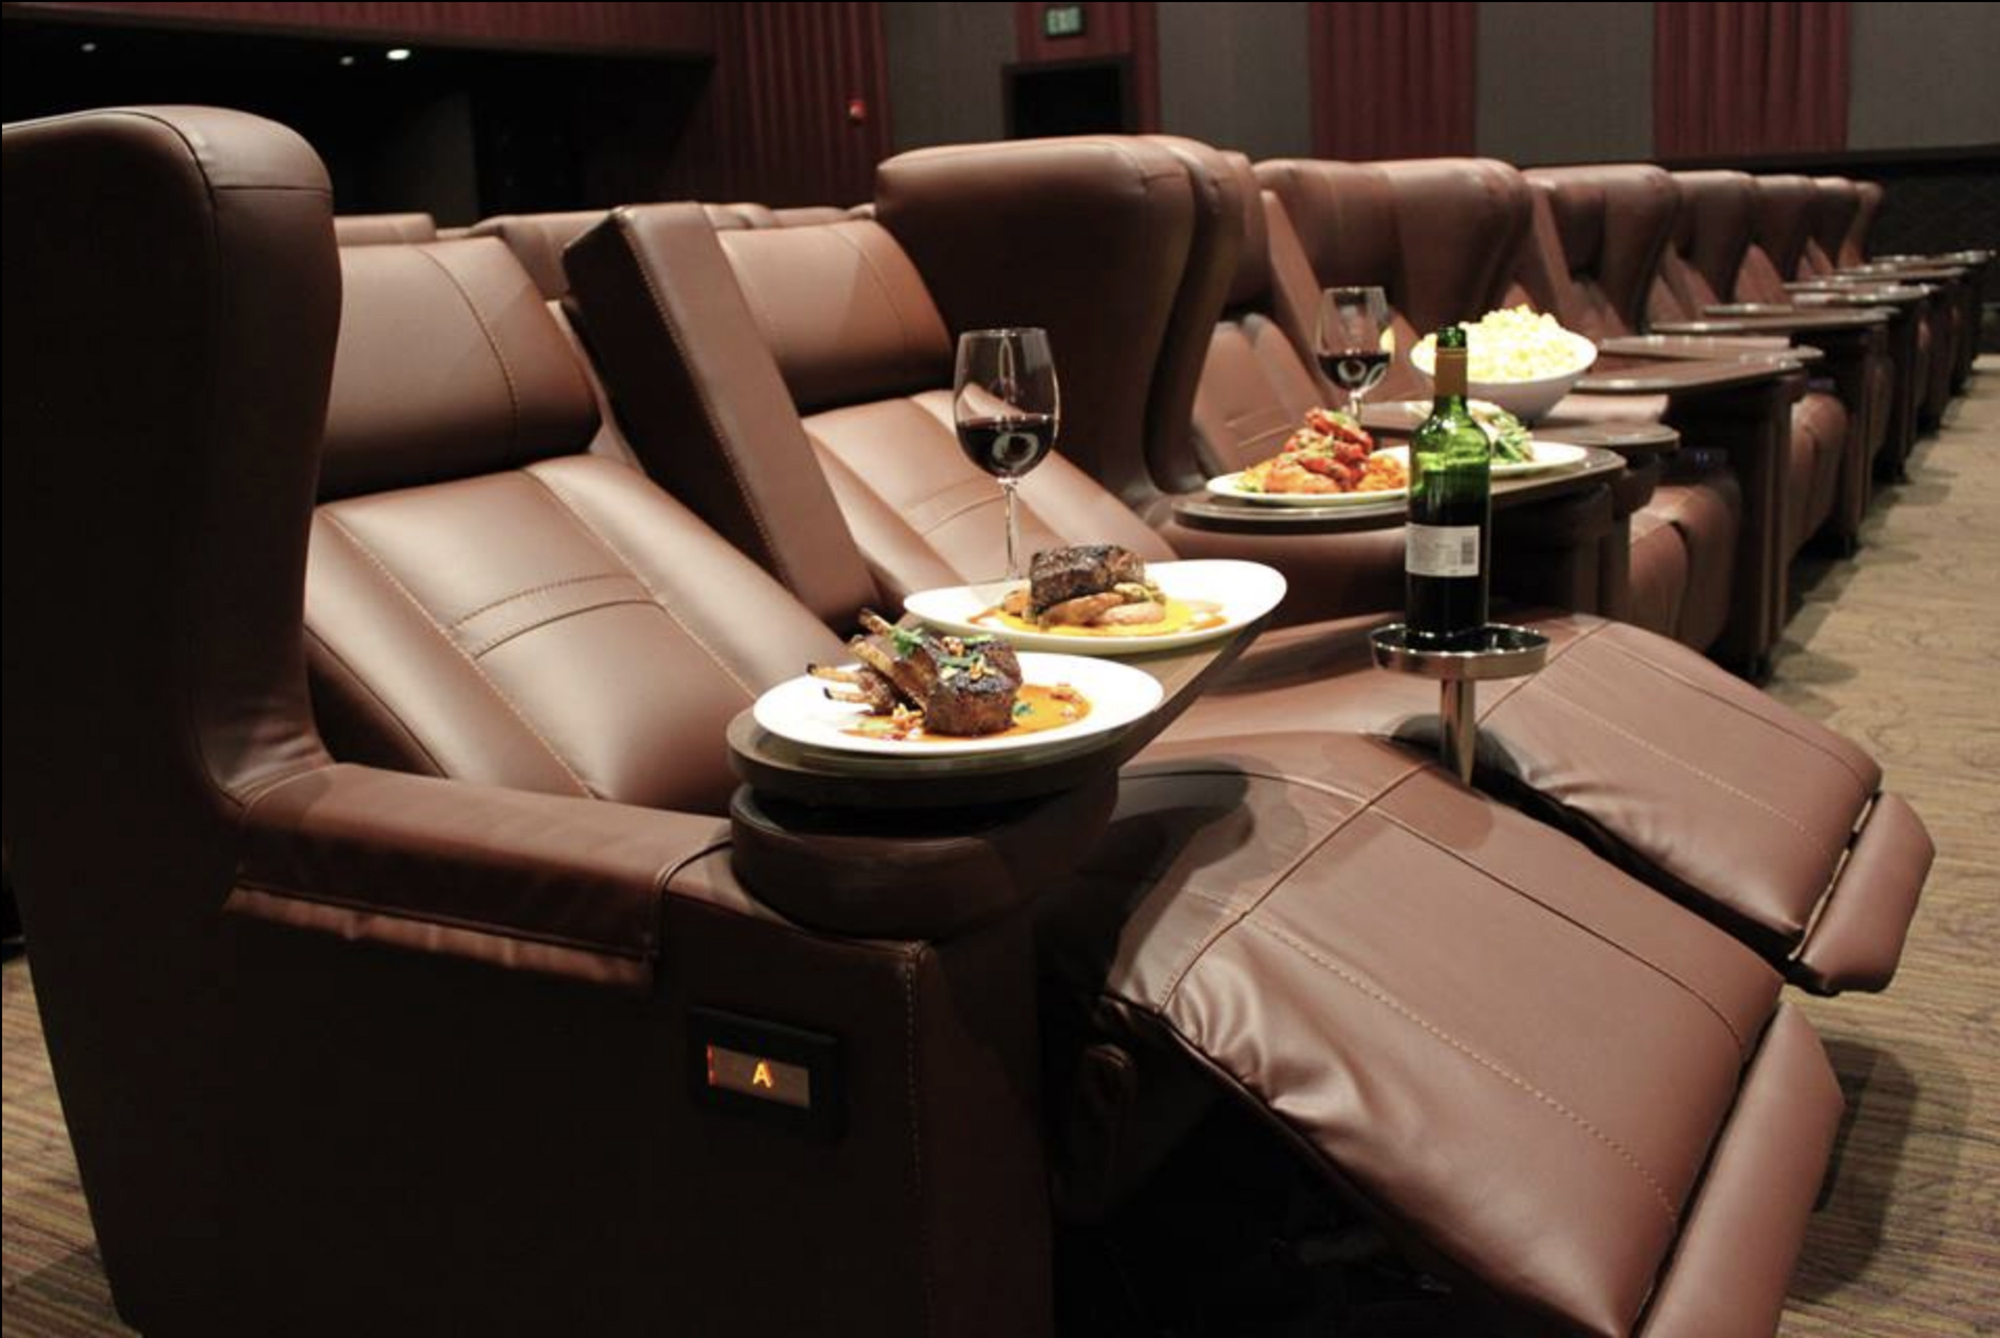 At CineBistro, patrons can watch the latest blockbuster seated on “ultra-luxurious, roomy high-back leather rocking chairs or recliners” while sipping on a $54 bottle of wine. Bottles at the Tampa CineBistro start at $25.